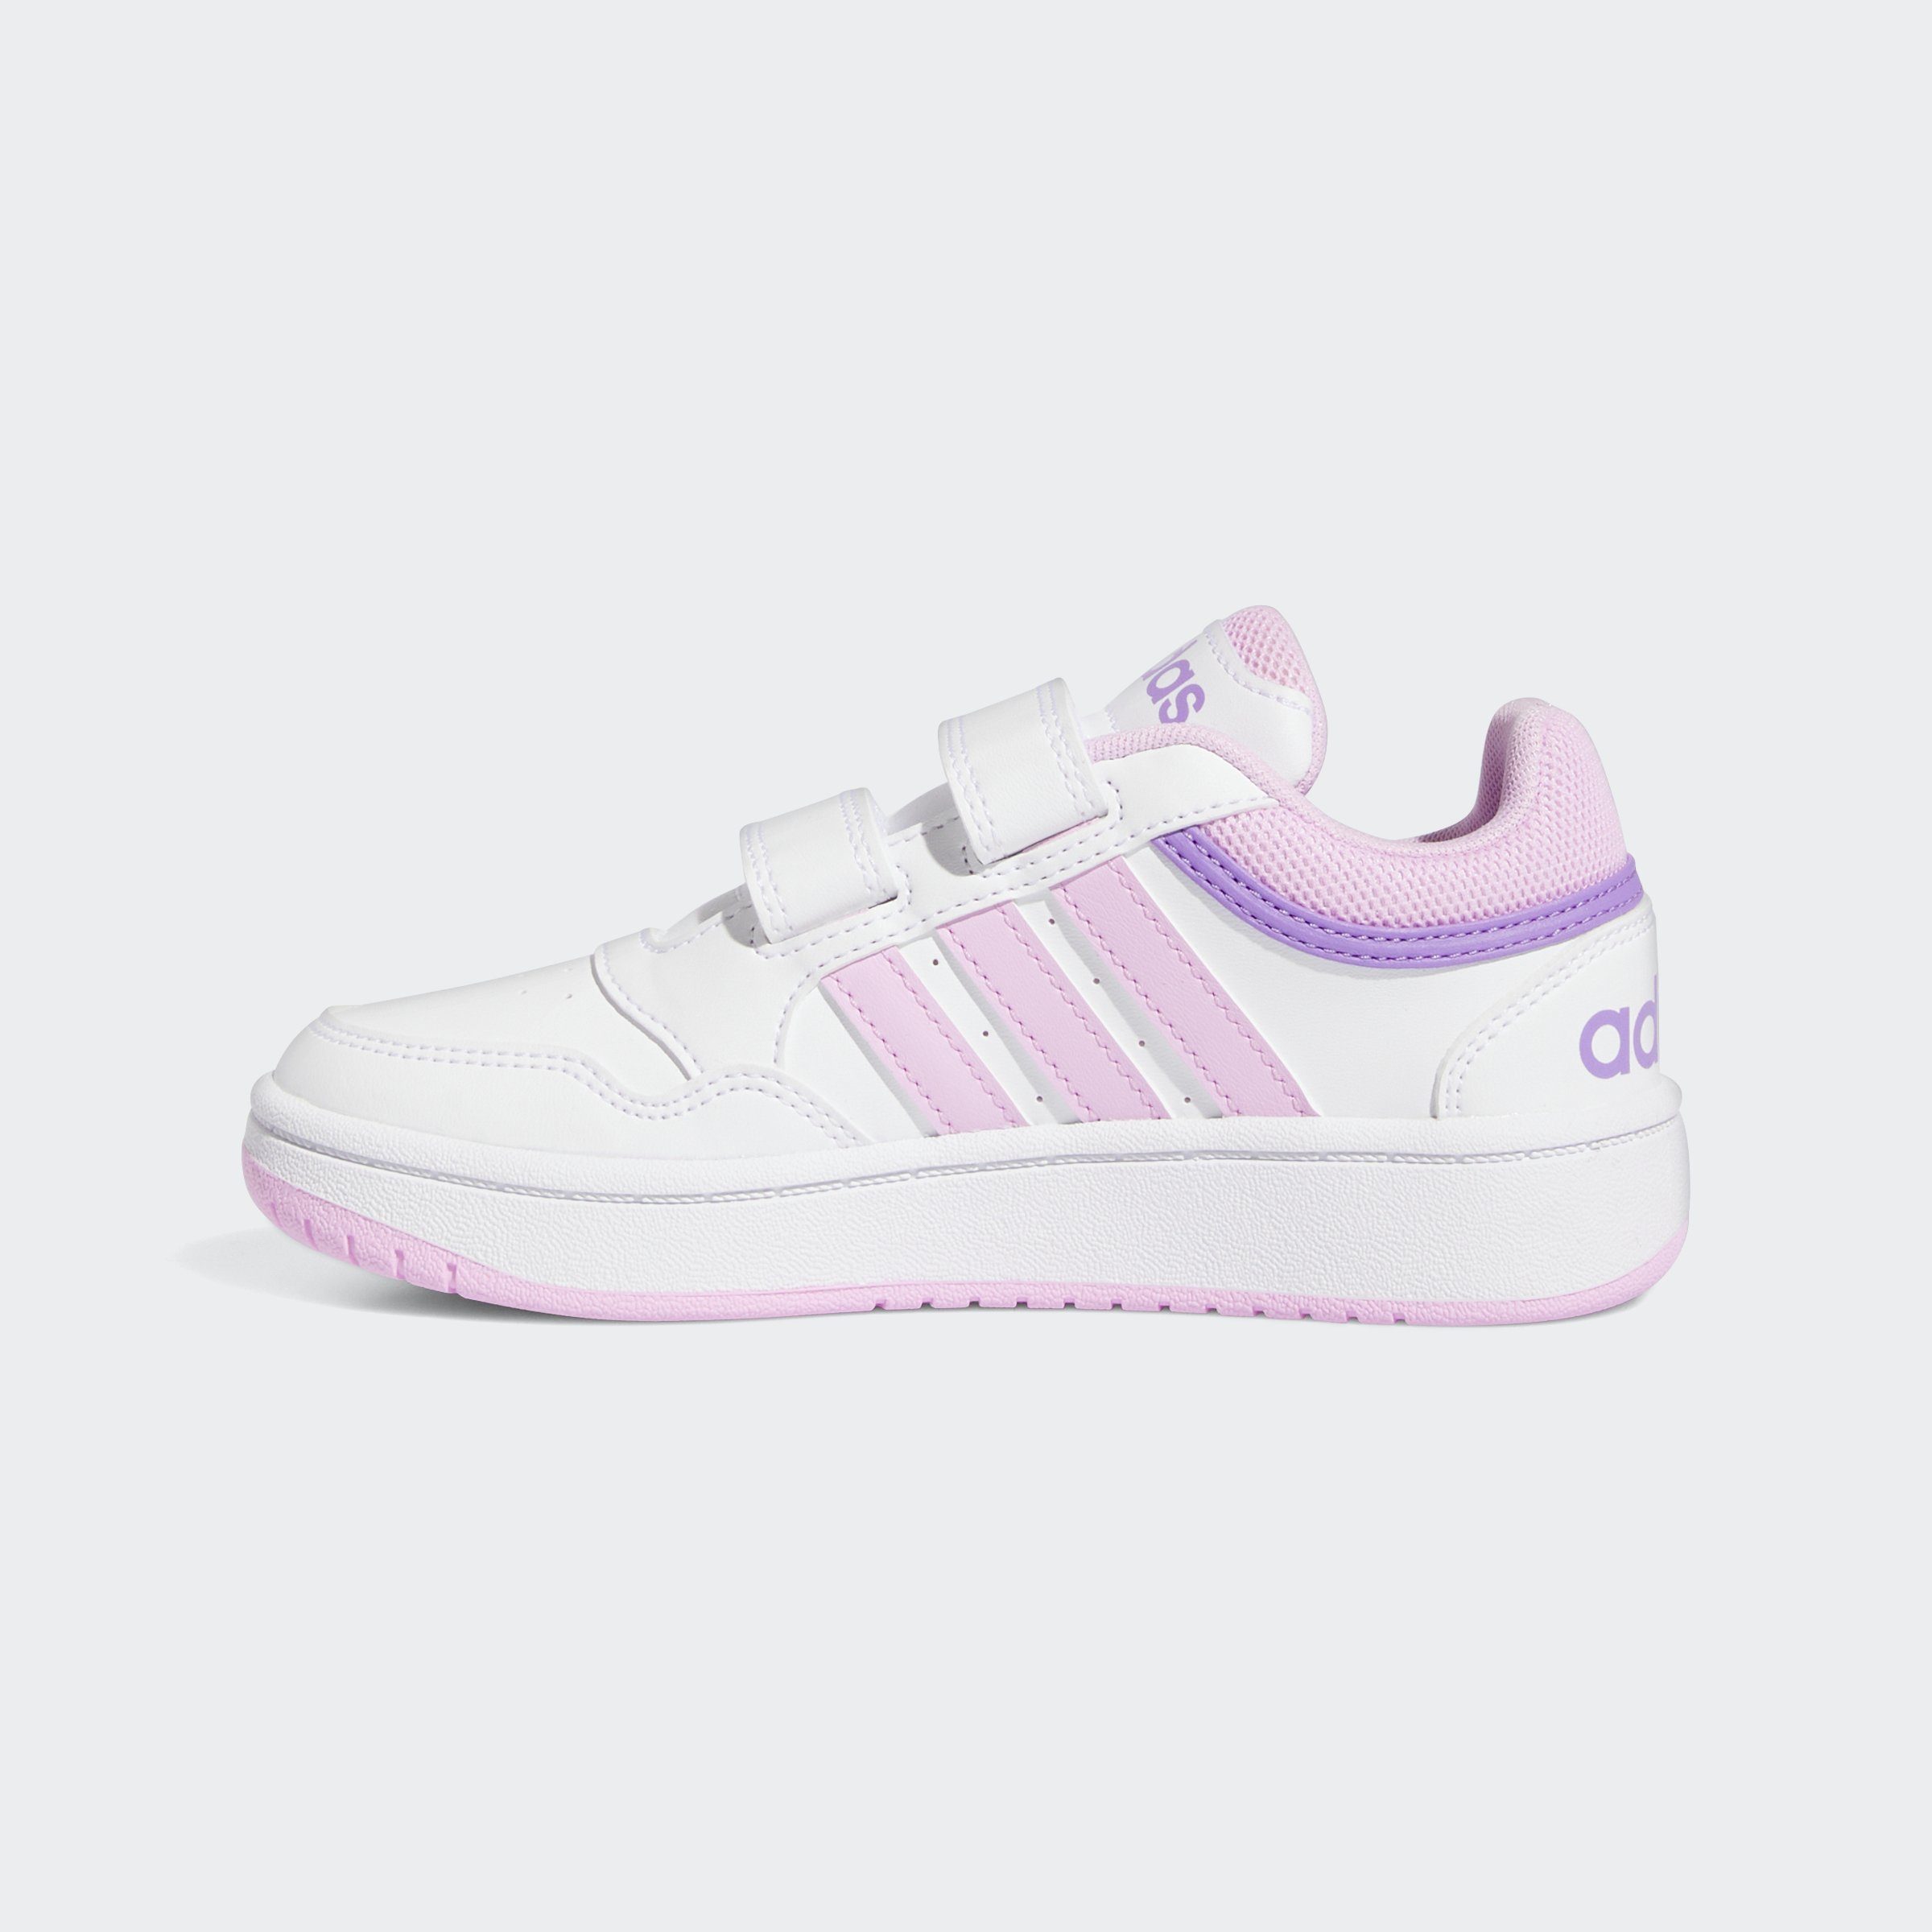 Bliss HOOPS Fusion Violet Lilac adidas Sportswear / / Sneaker Cloud White